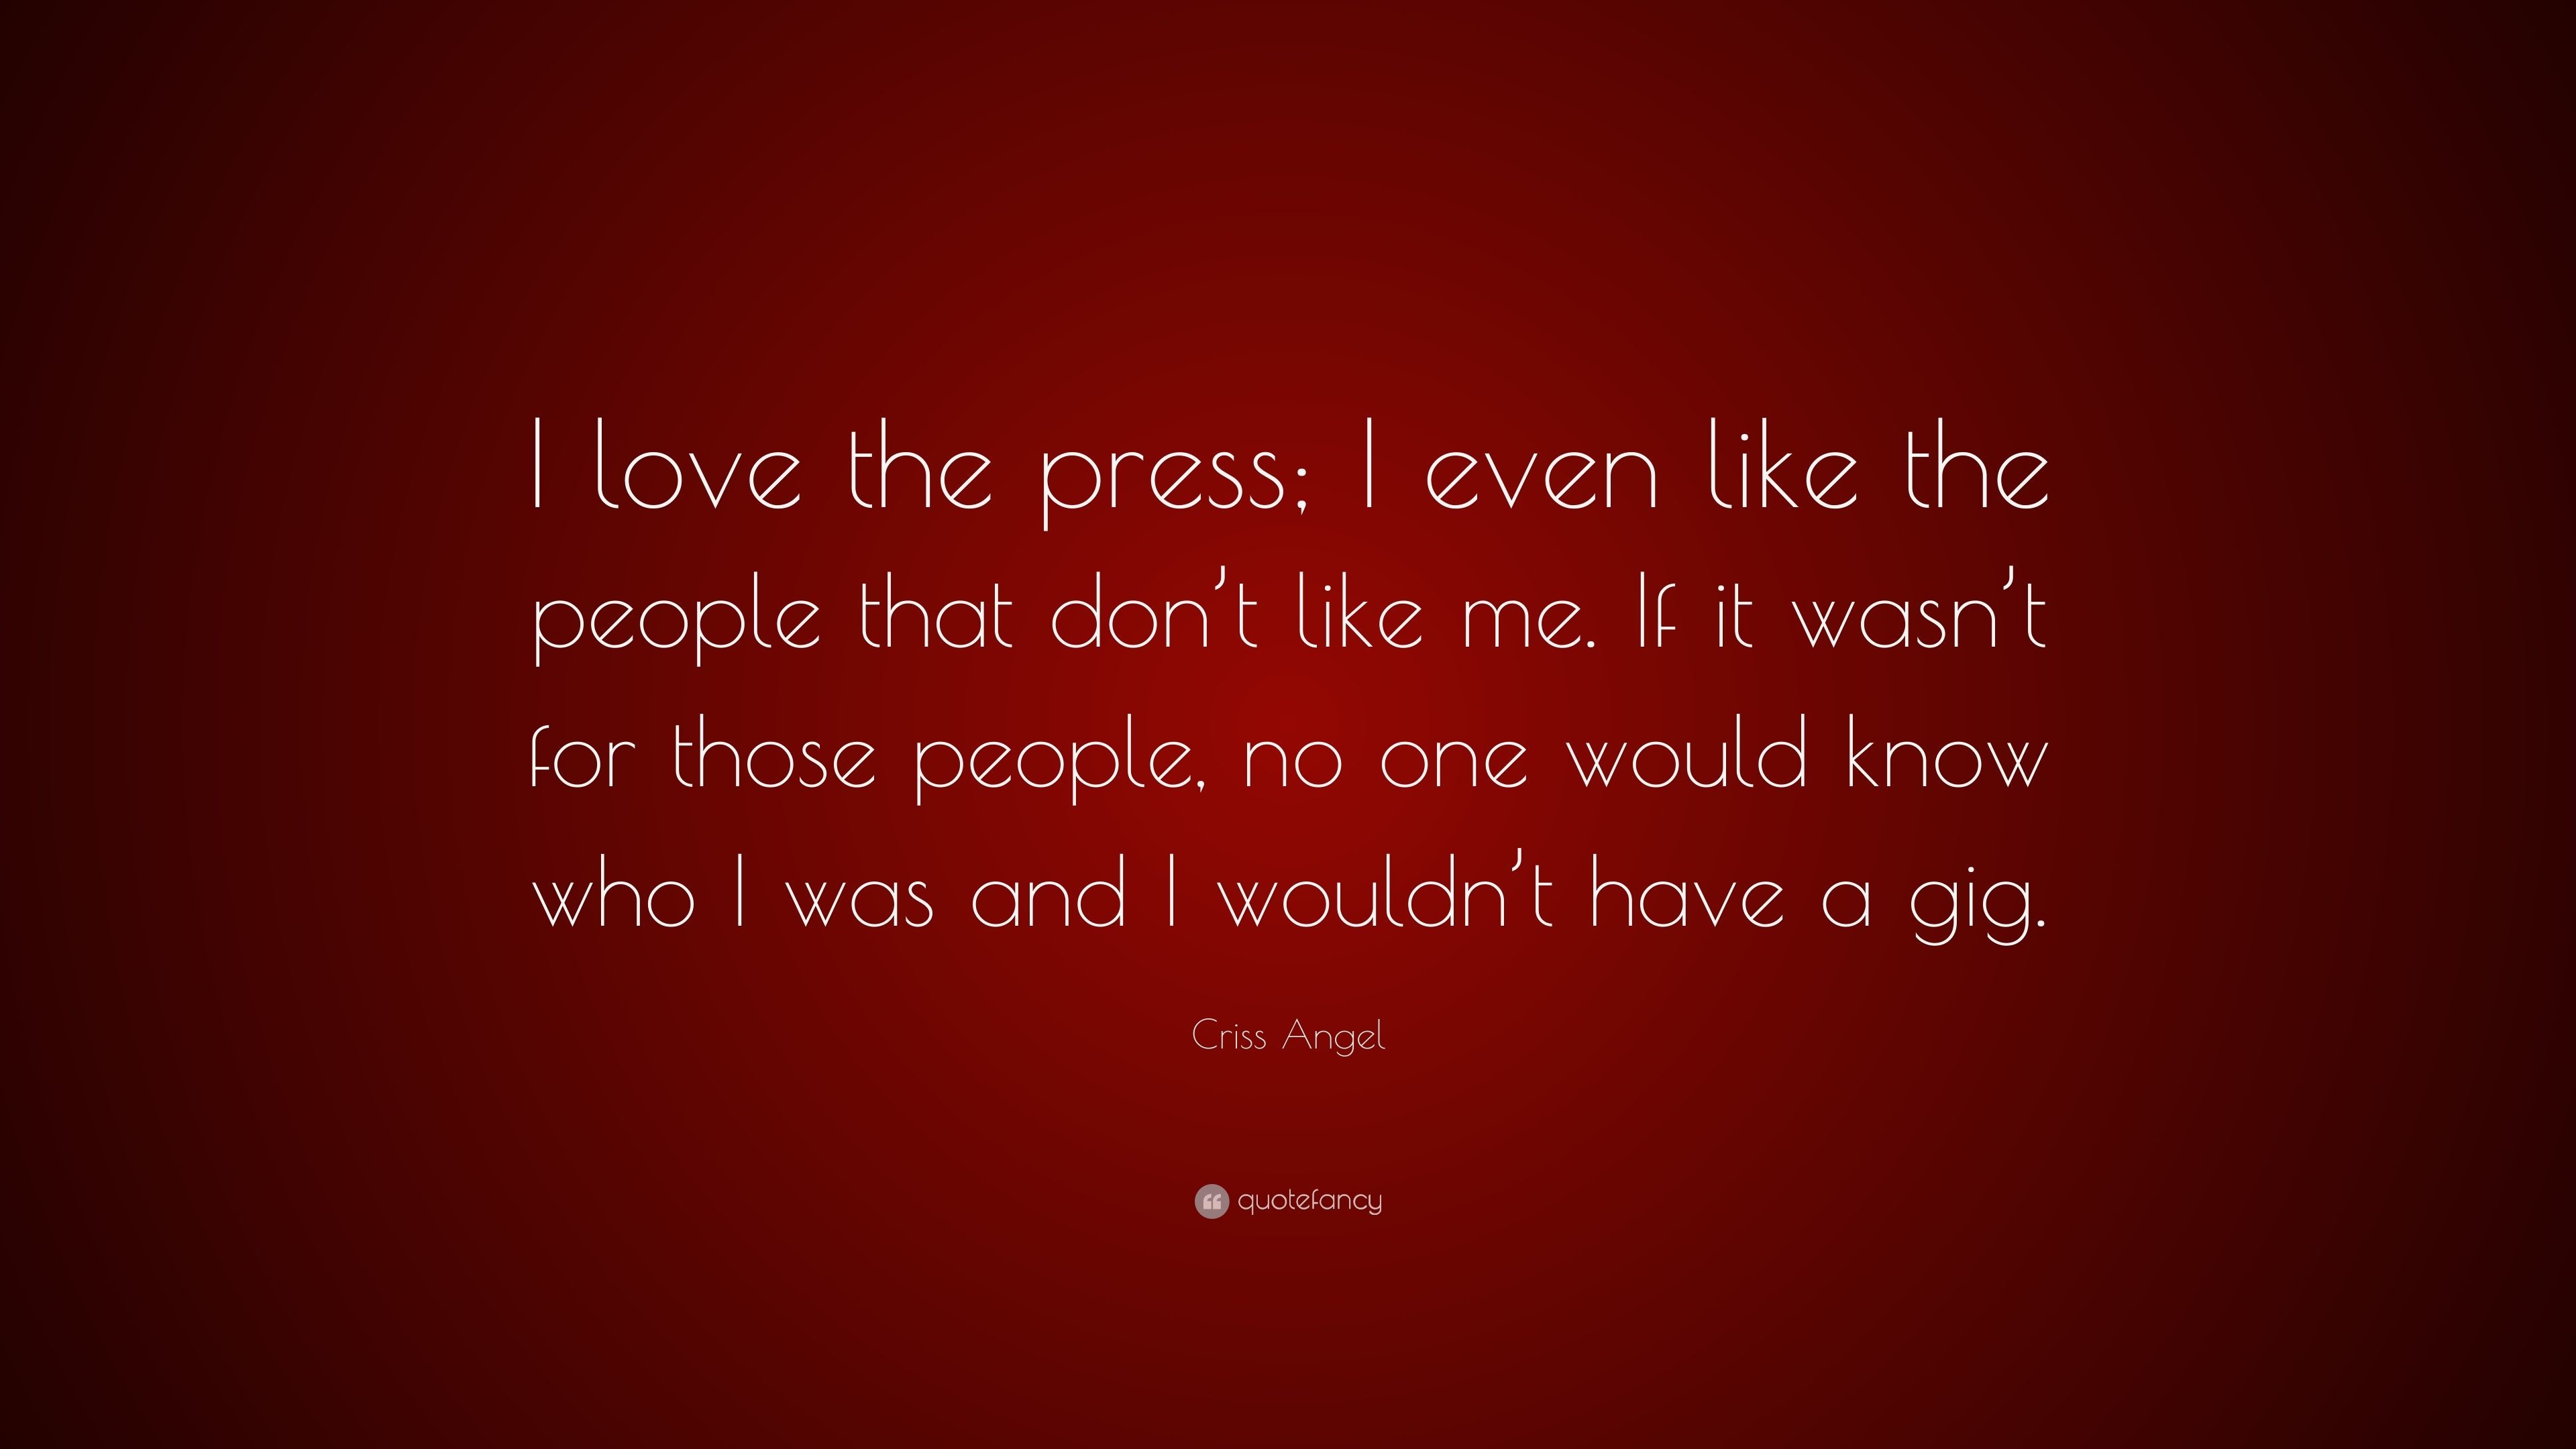 3840x2160 Criss Angel Quote: “I love the press; I even like the people that